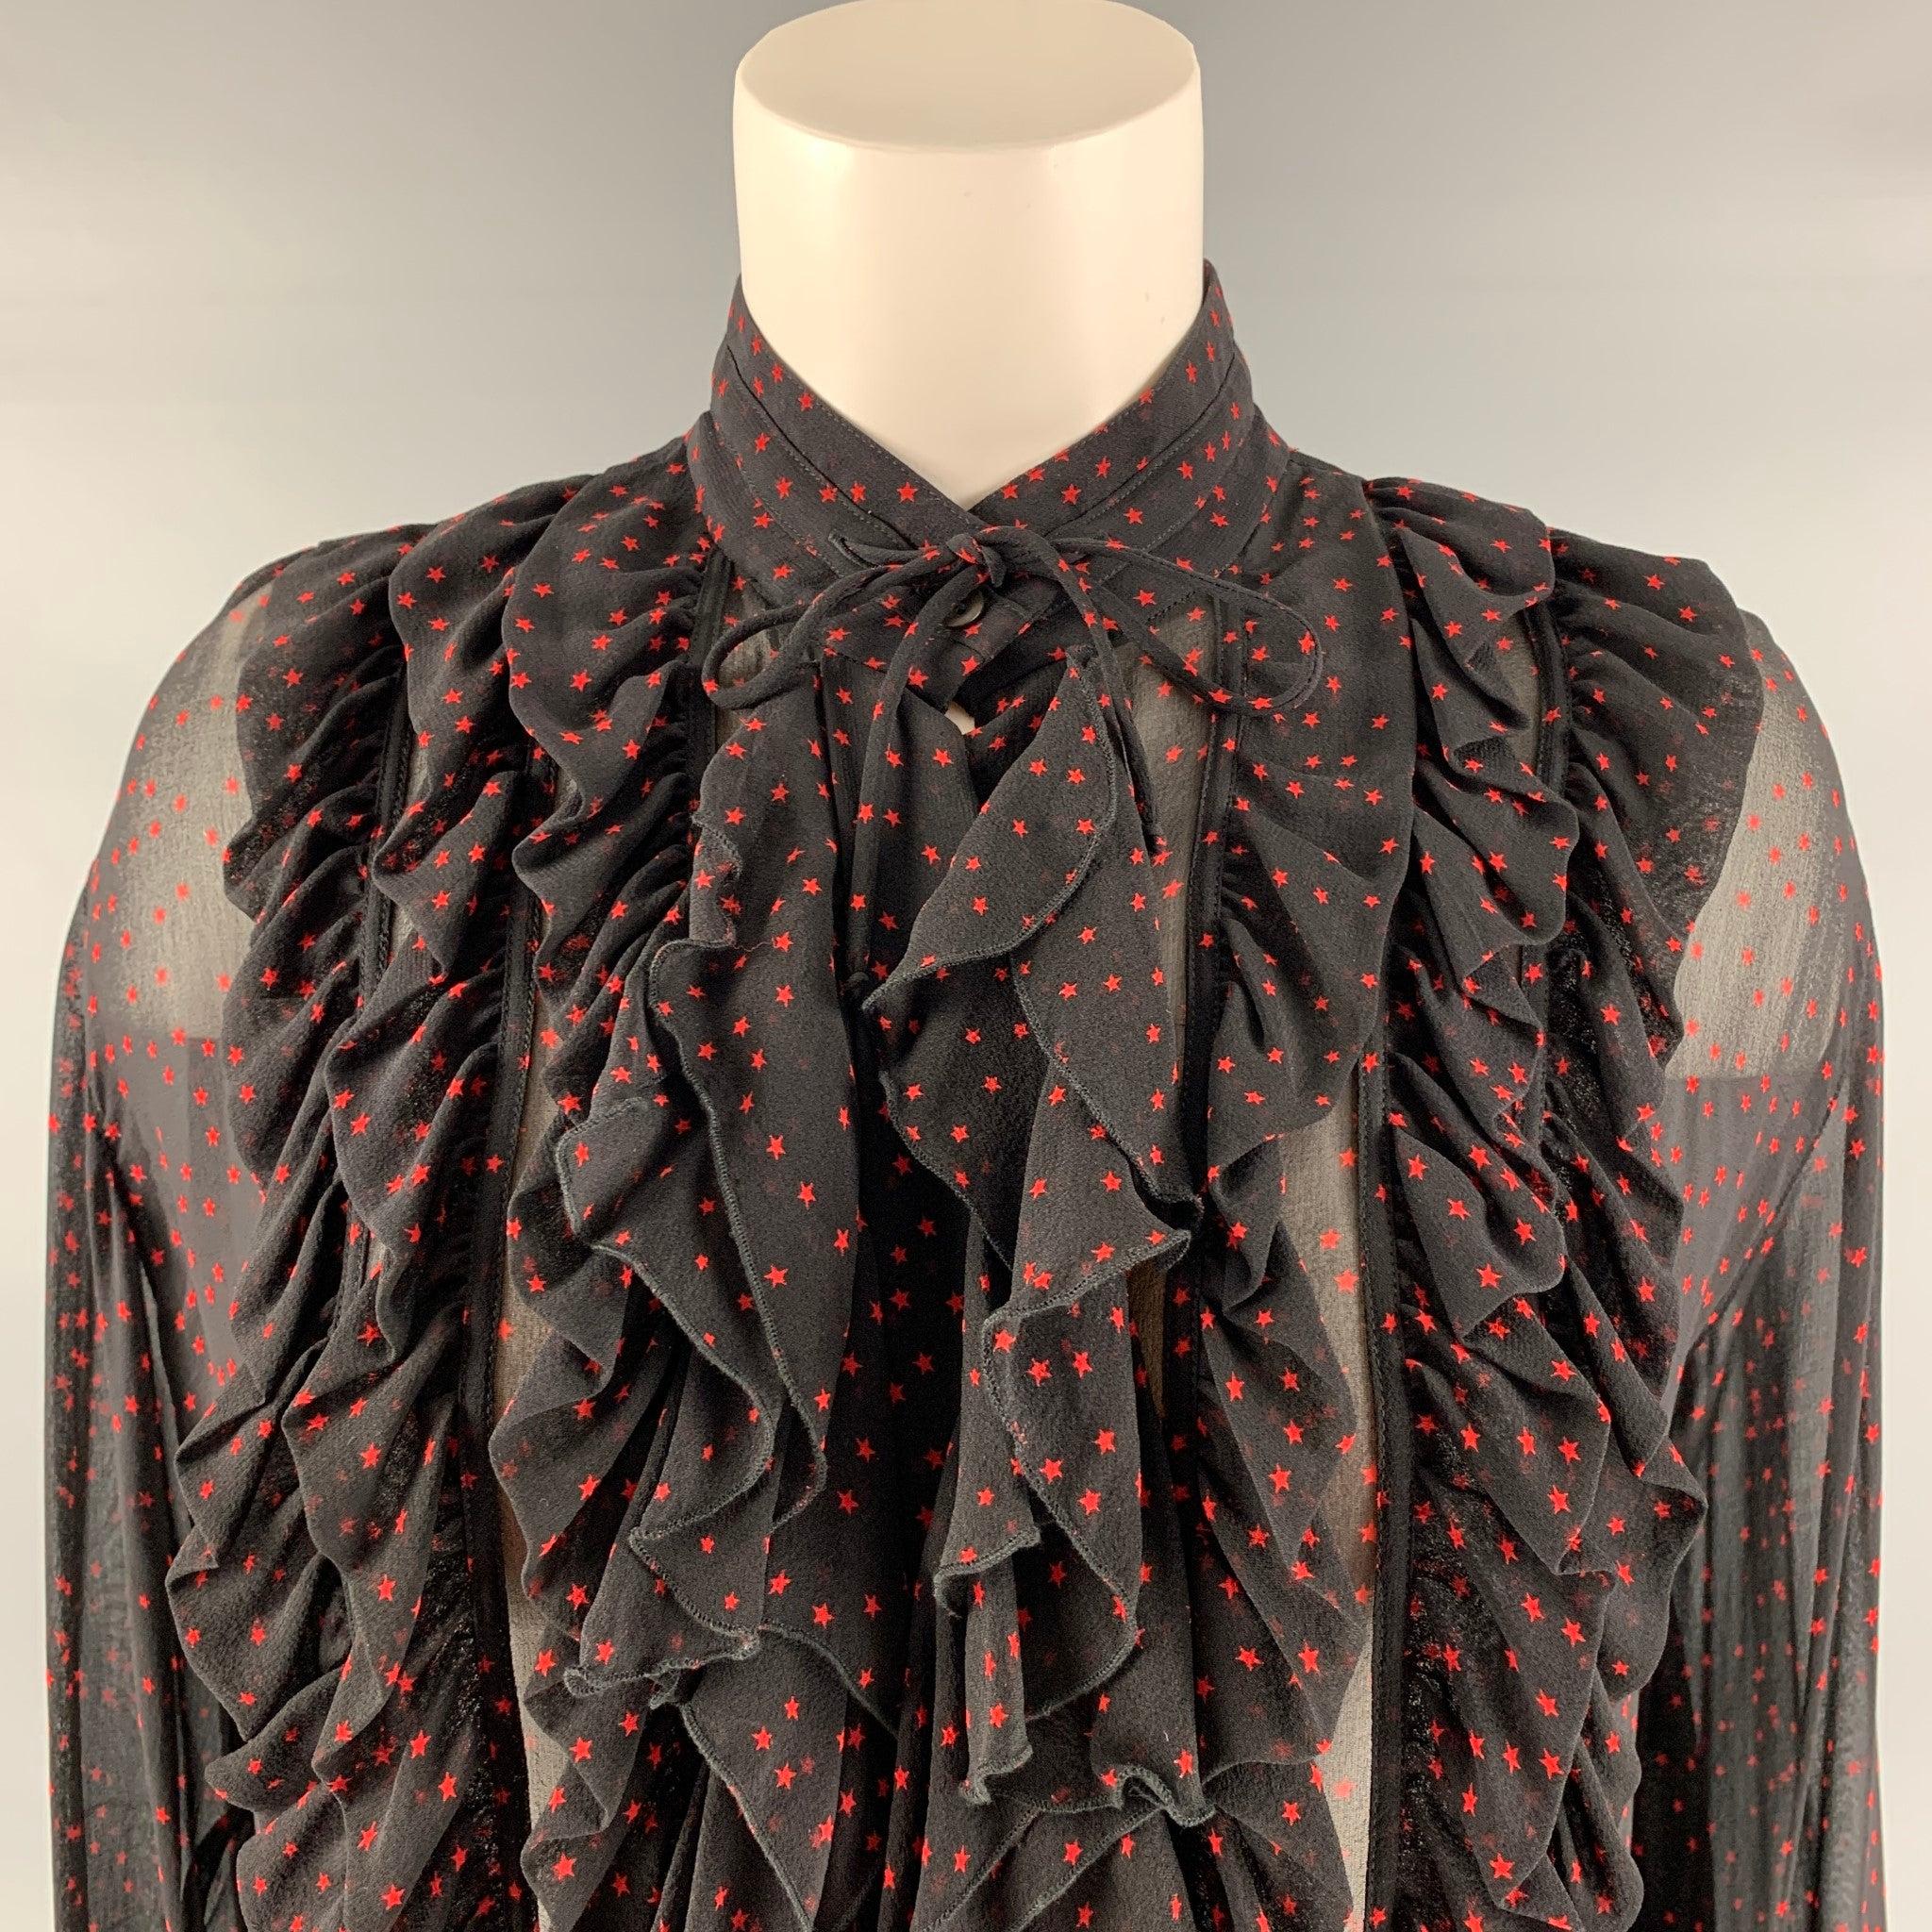 DRIES VAN NOTEN long sleeve shirt comes in a black and red star printed silk featuring ruffled details at front and sleeves, button down closure and tie at neckline. Excellent Pre-Owned Condition. 

Marked:   36 

Measurements: 
 
Shoulder: 20